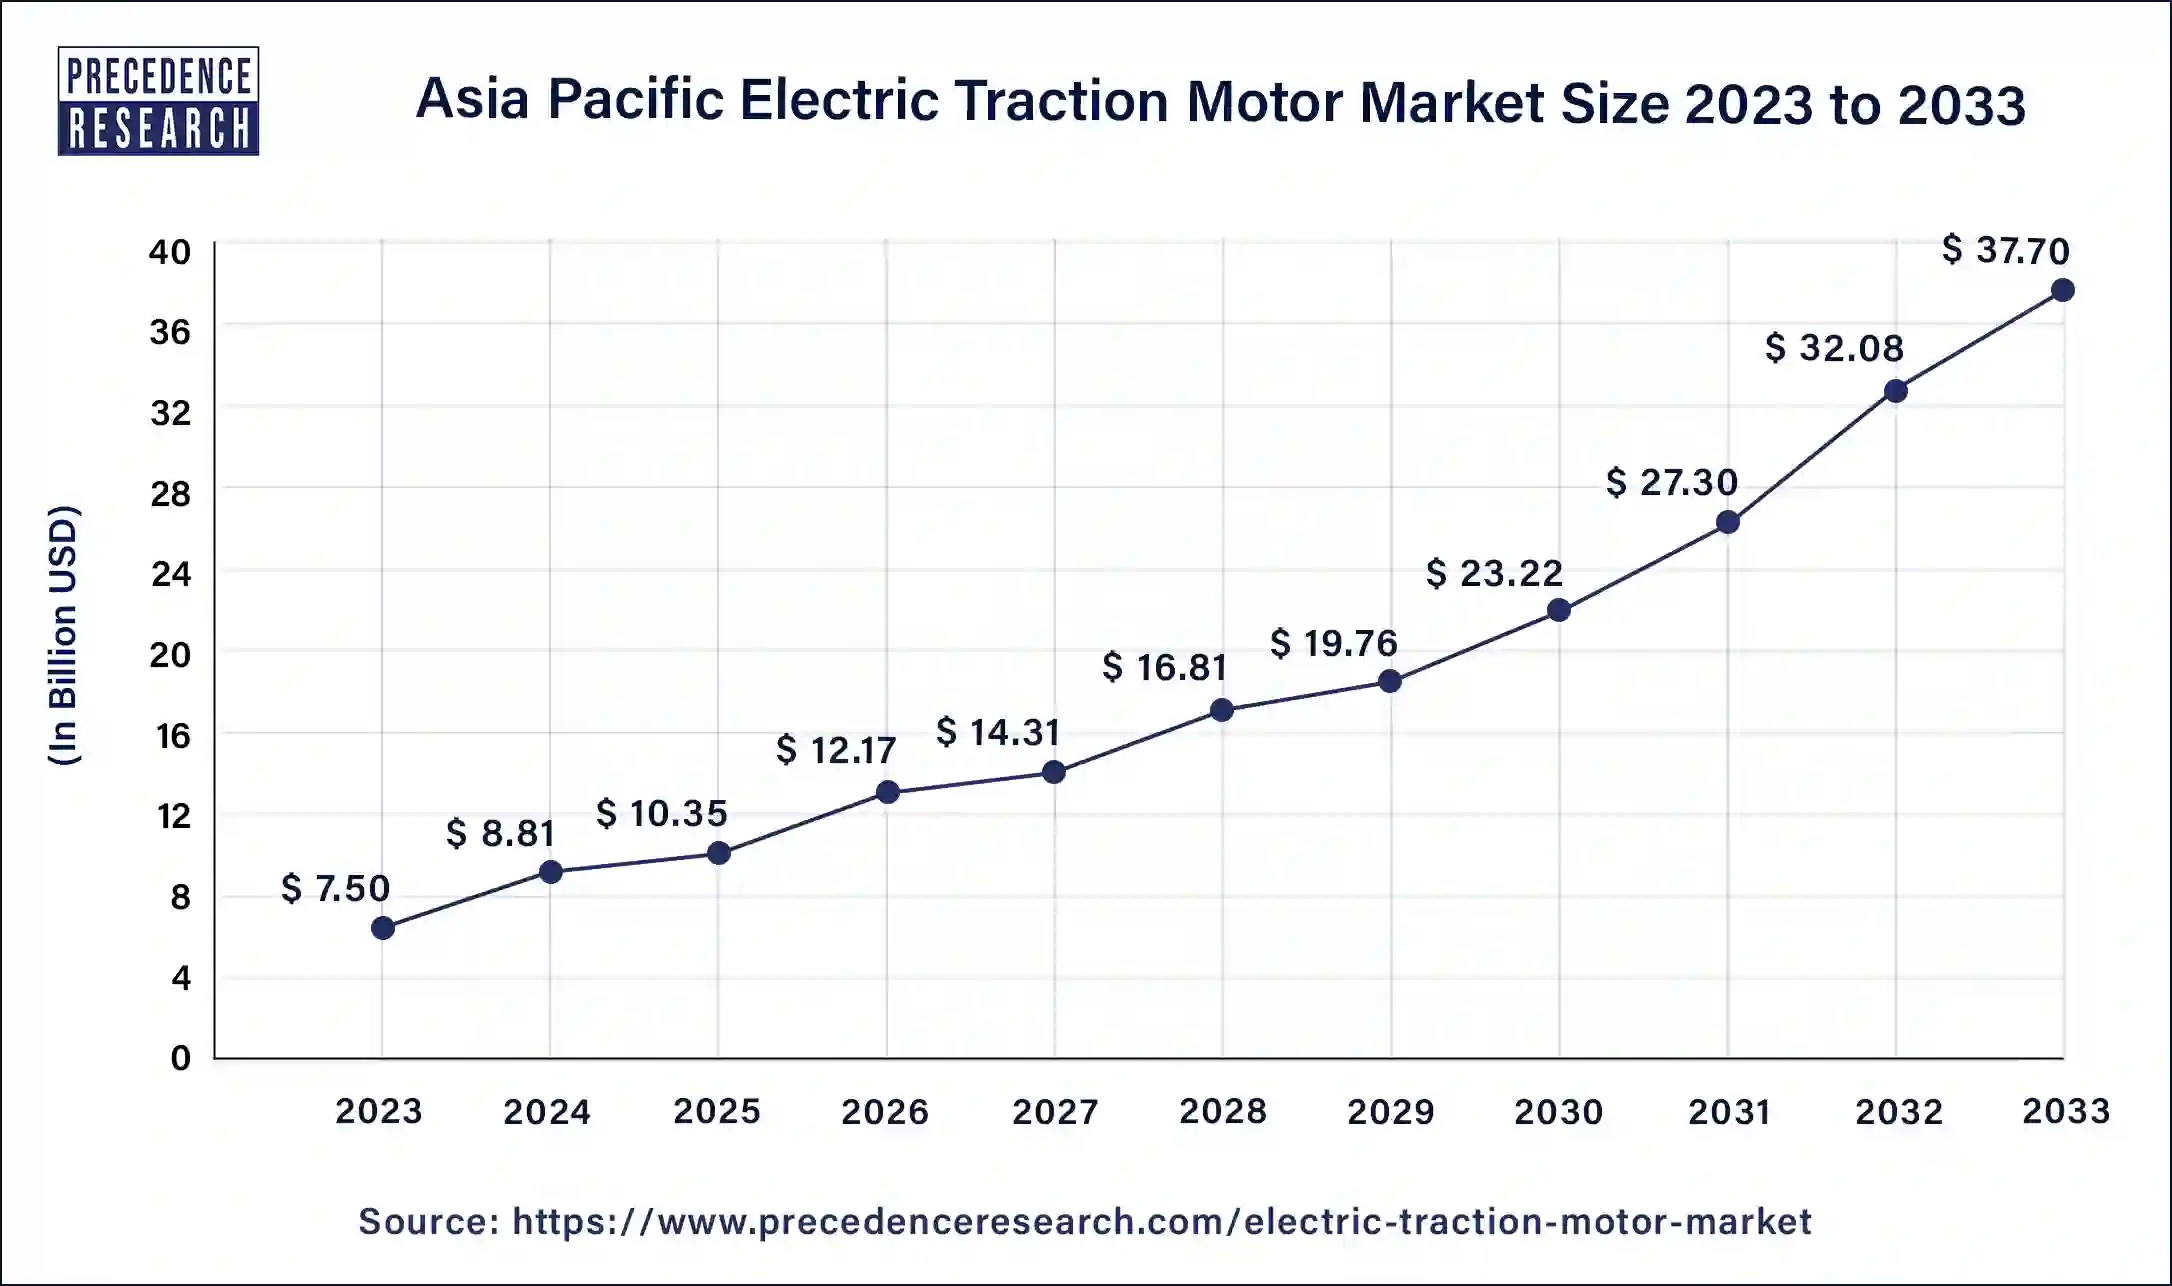 Asia Pacific Electric Traction Motor Market Size 2024 to 2033